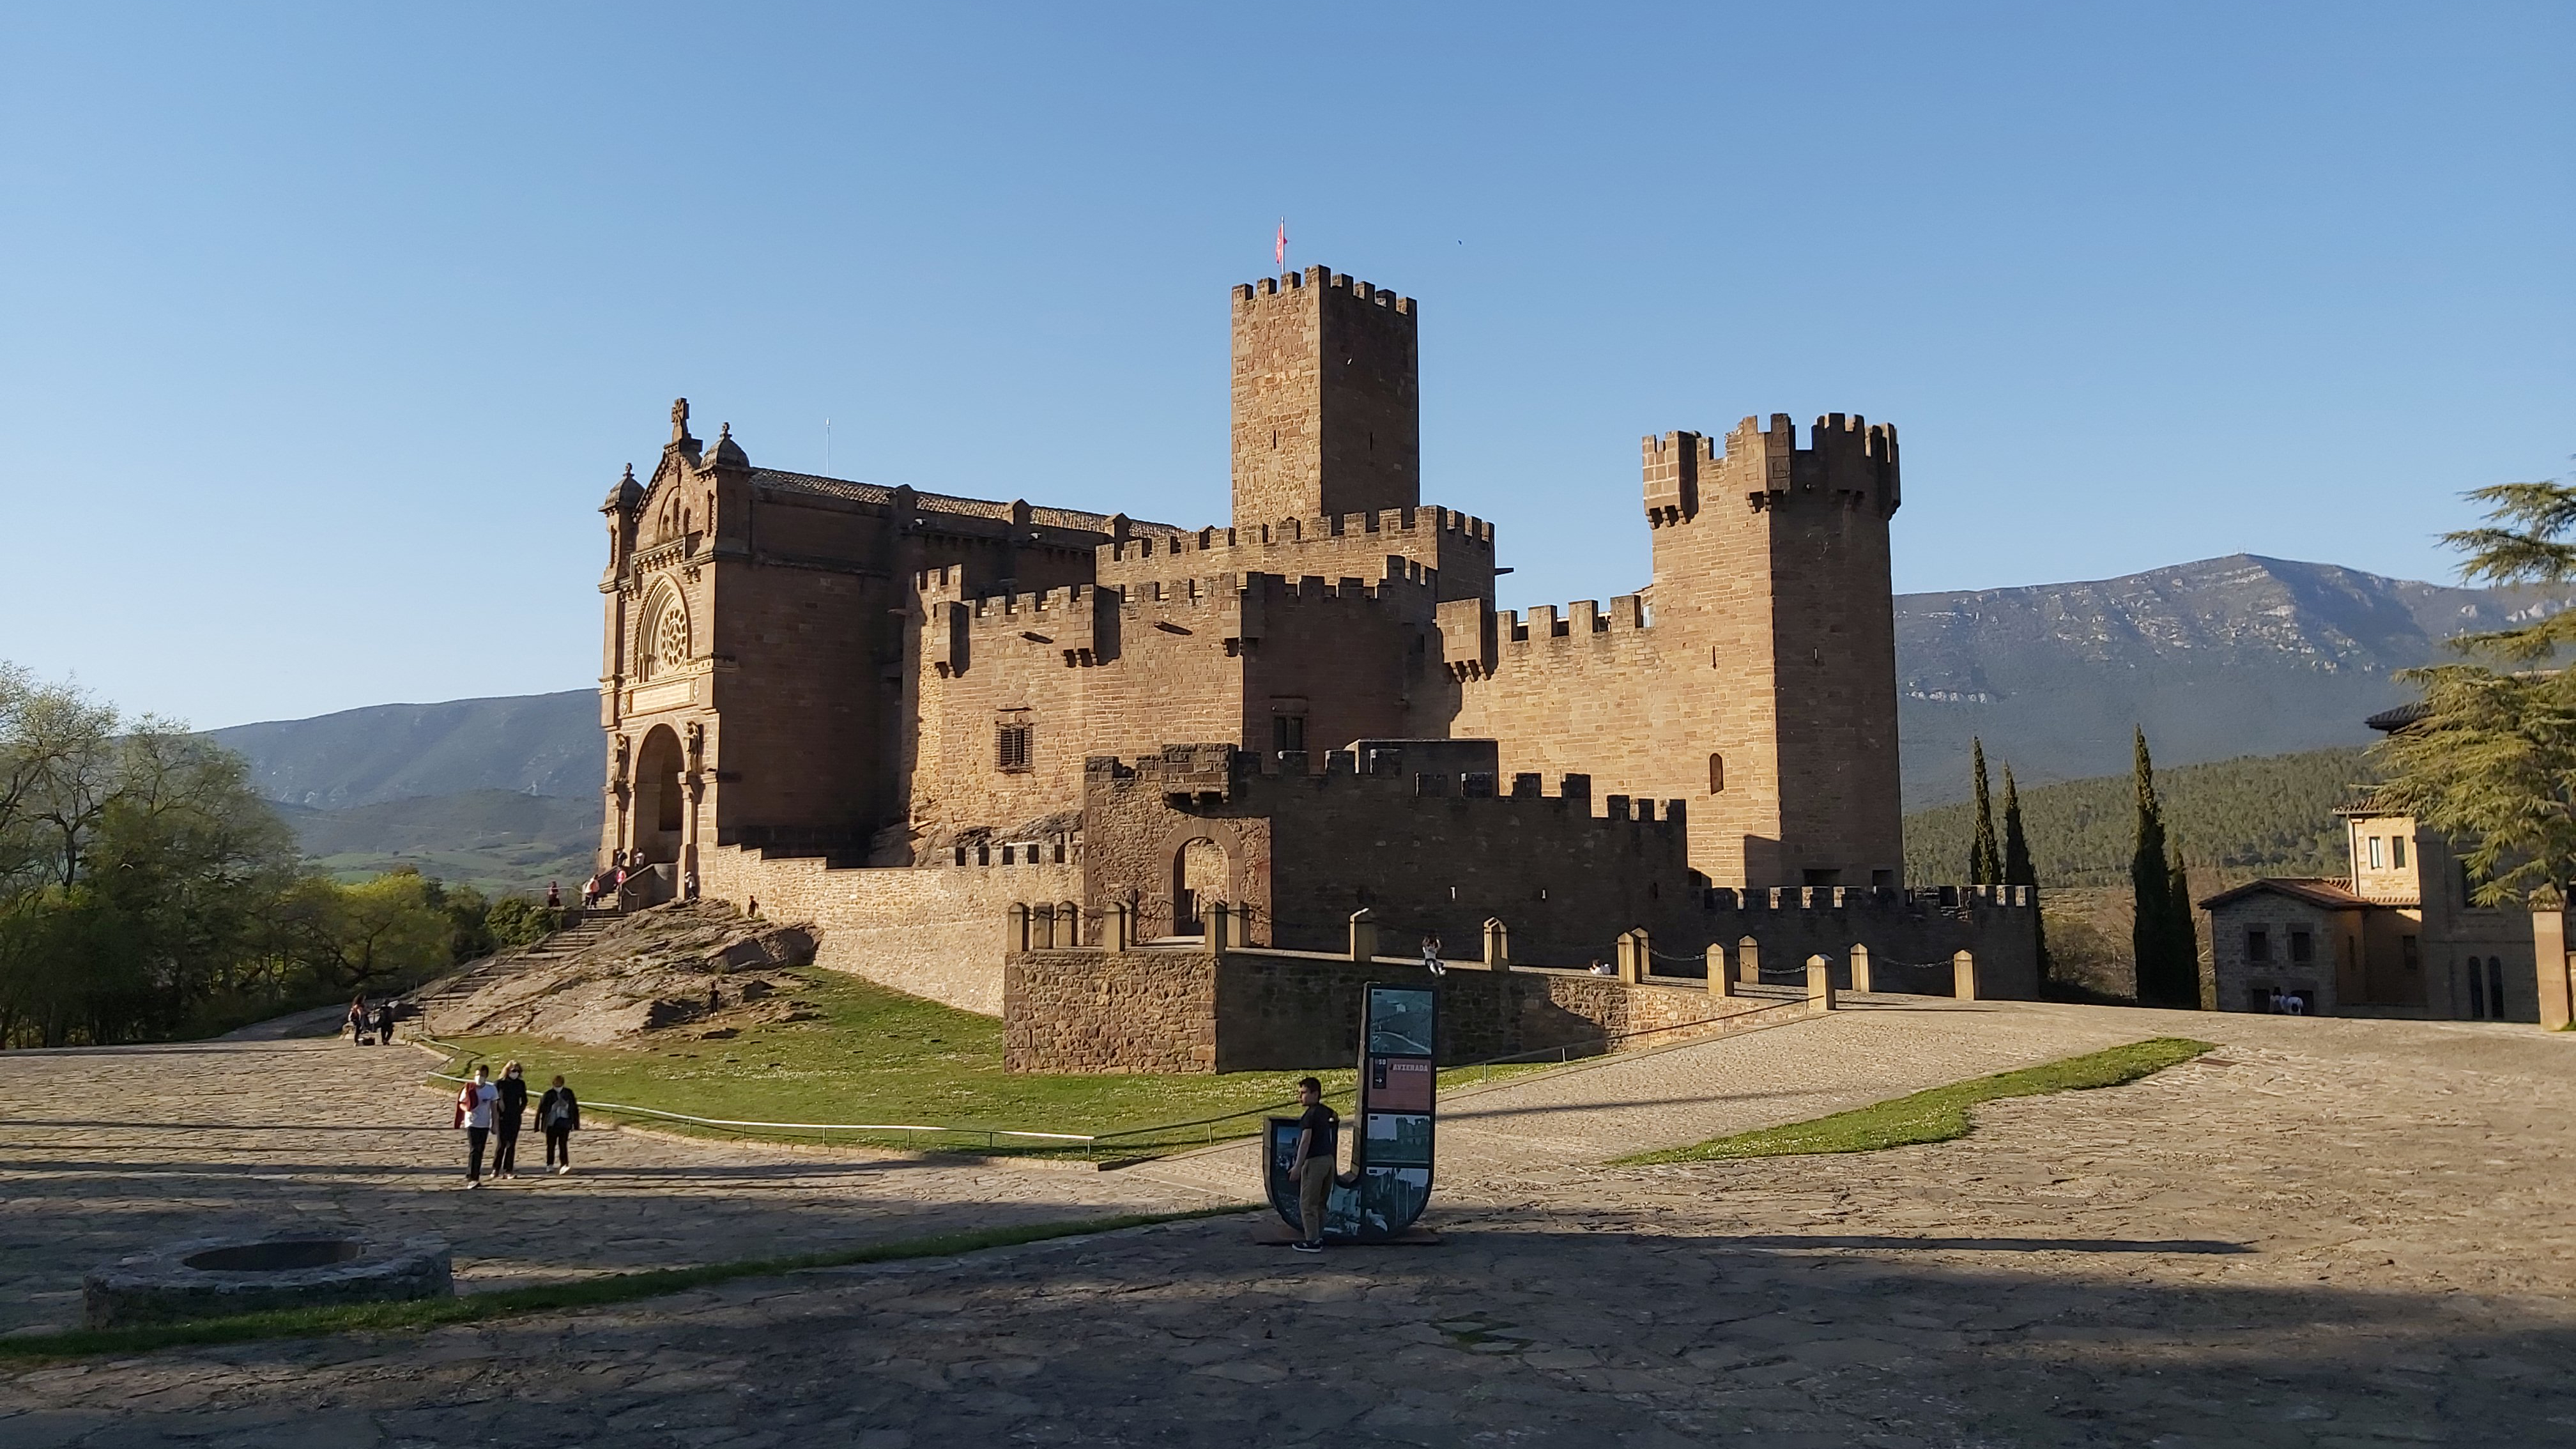 Audio-guided tour of the Castle of Javier